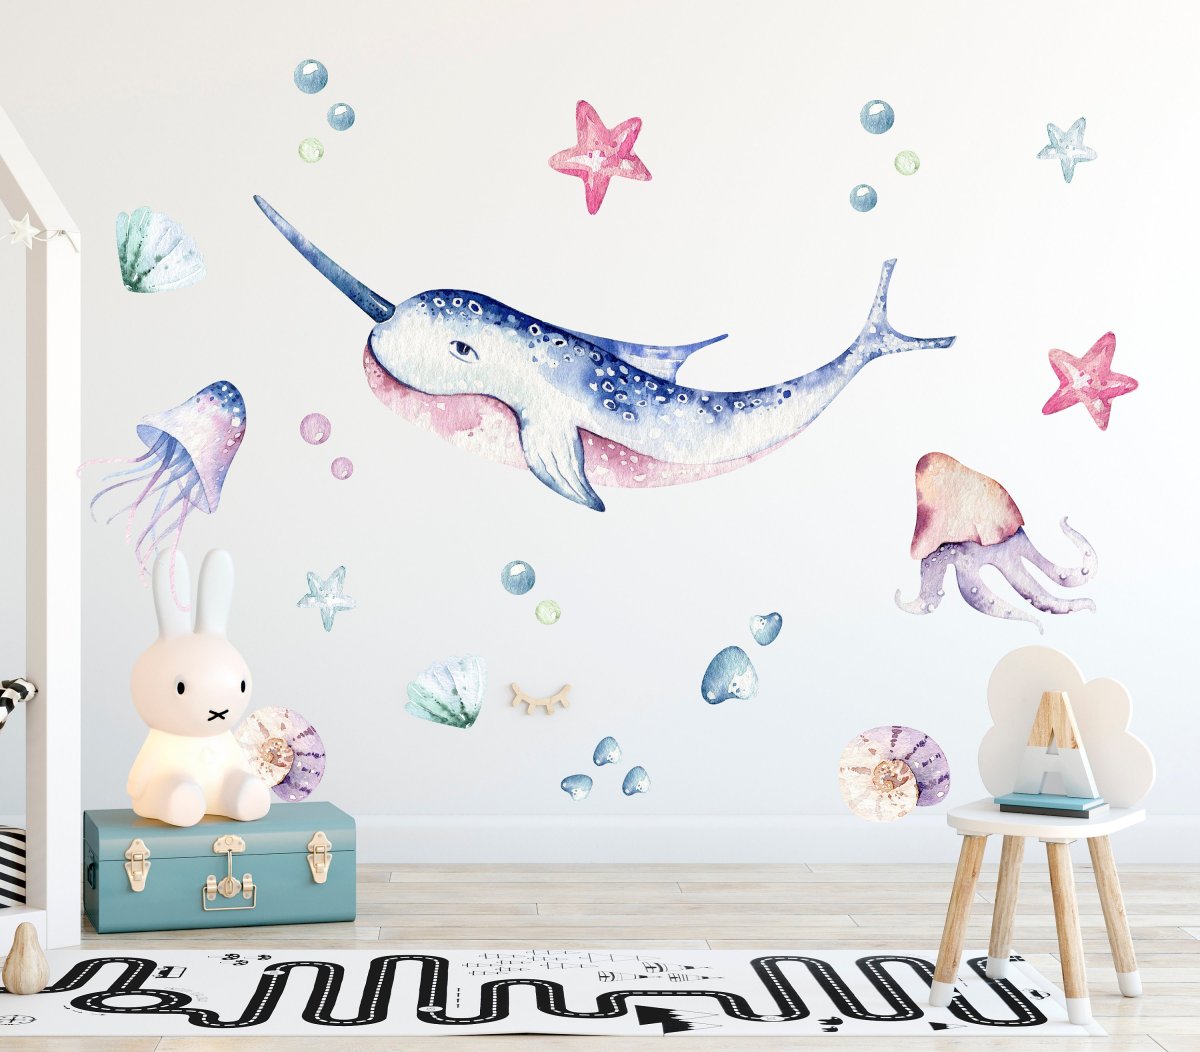 Wall Decal for Kids room- Narwhal, Fishes, Jellyfish